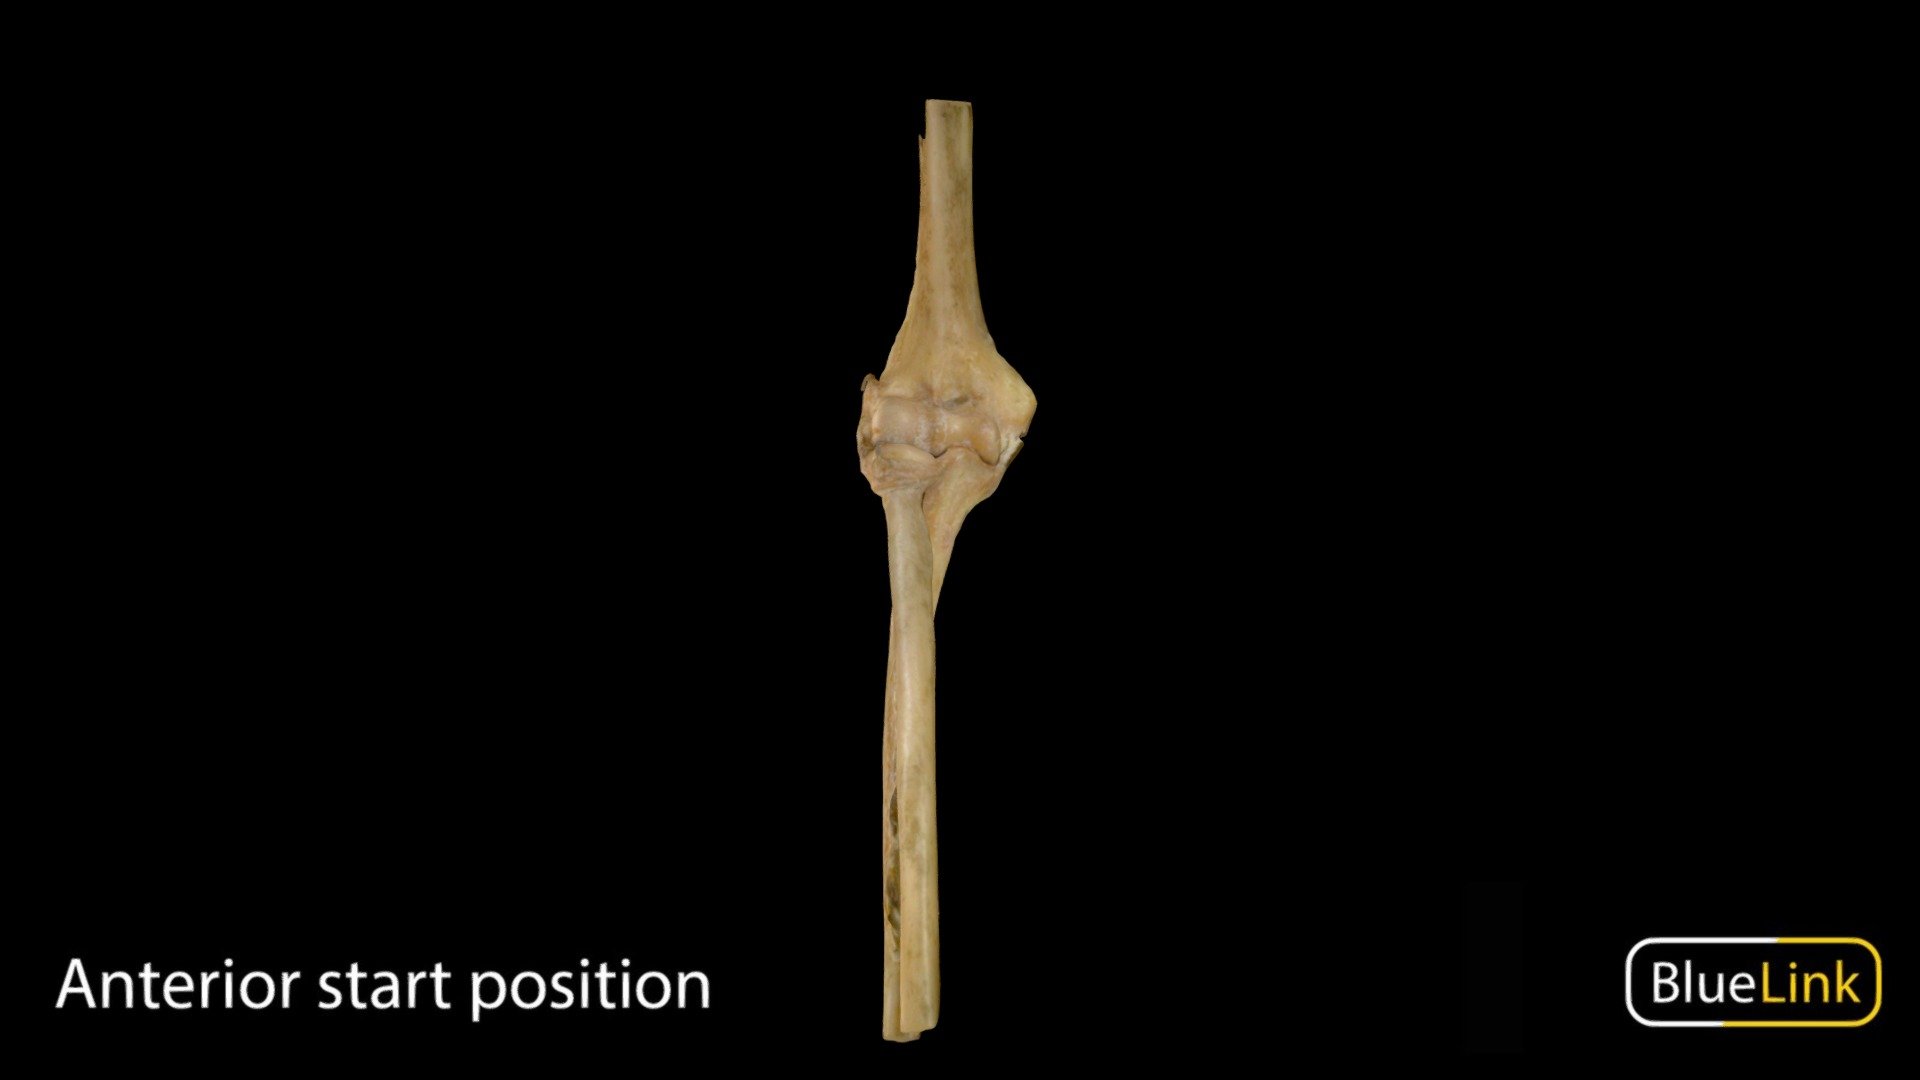 Human elbow joint

Captured with: EinScan Pro

Captured and edited by: Cristina Prall

University of Michigan

25548-U02 - Elbow Joint - 3D model by Bluelink Anatomy - University of Michigan (@bluelinkanatomy) 3d model